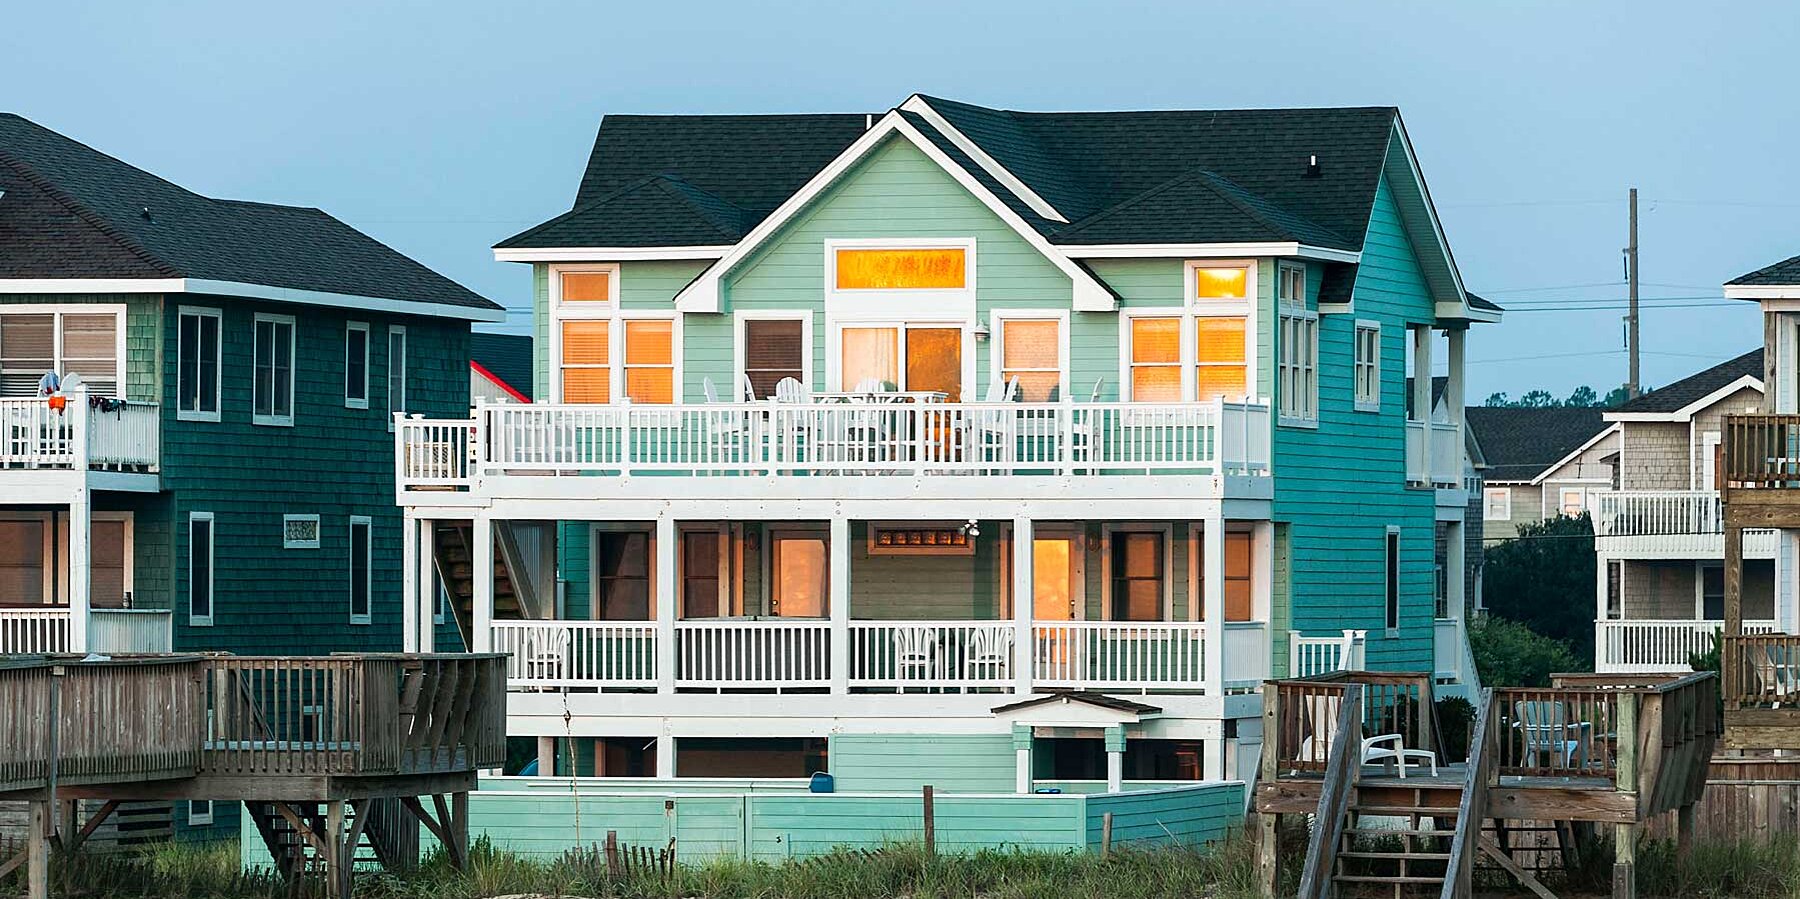 Waterfront Beach house in Nags Head in the Outer Banks area